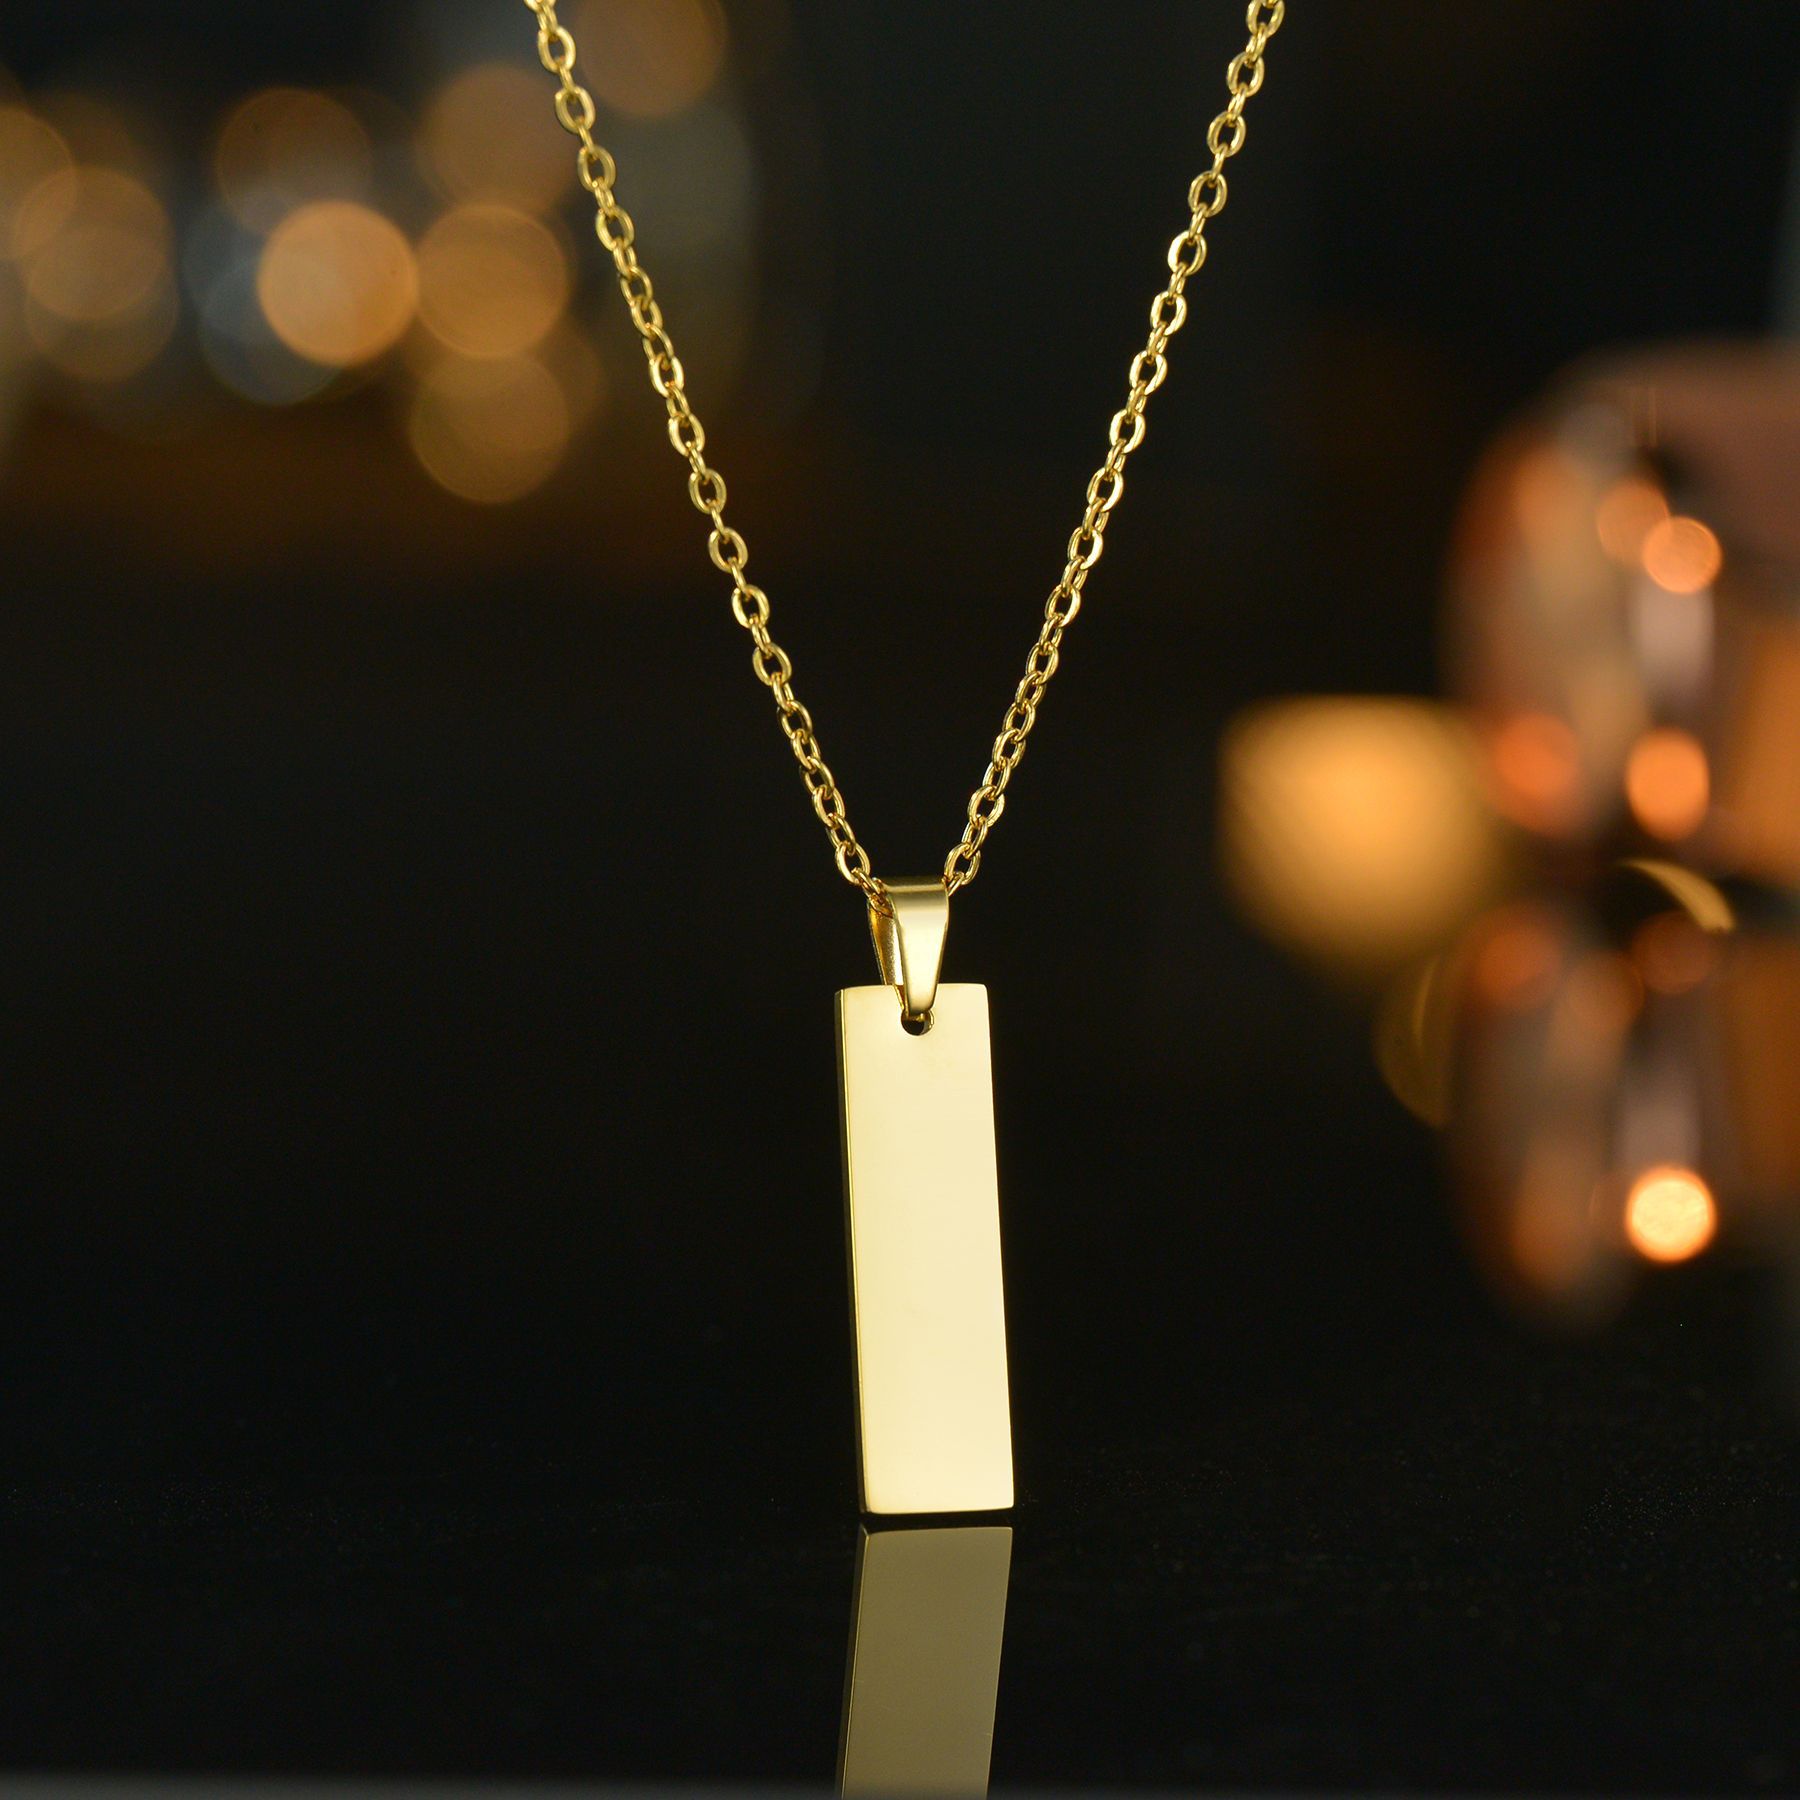 4:Lady - Gold necklace